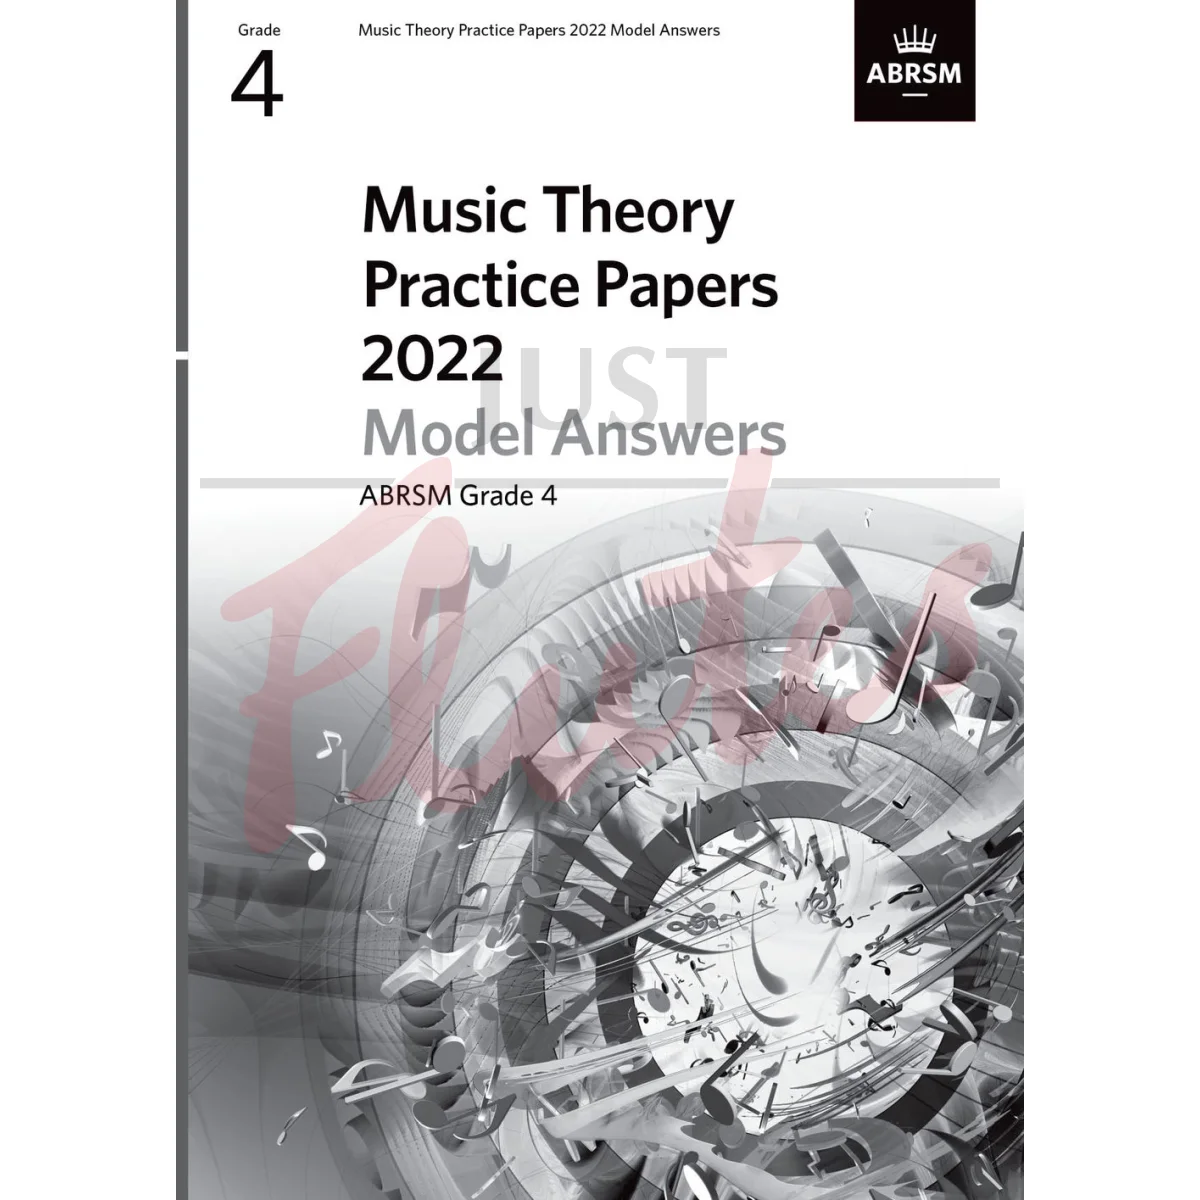 Music Theory Practice Papers 2022 Grade 4 - Model Answers